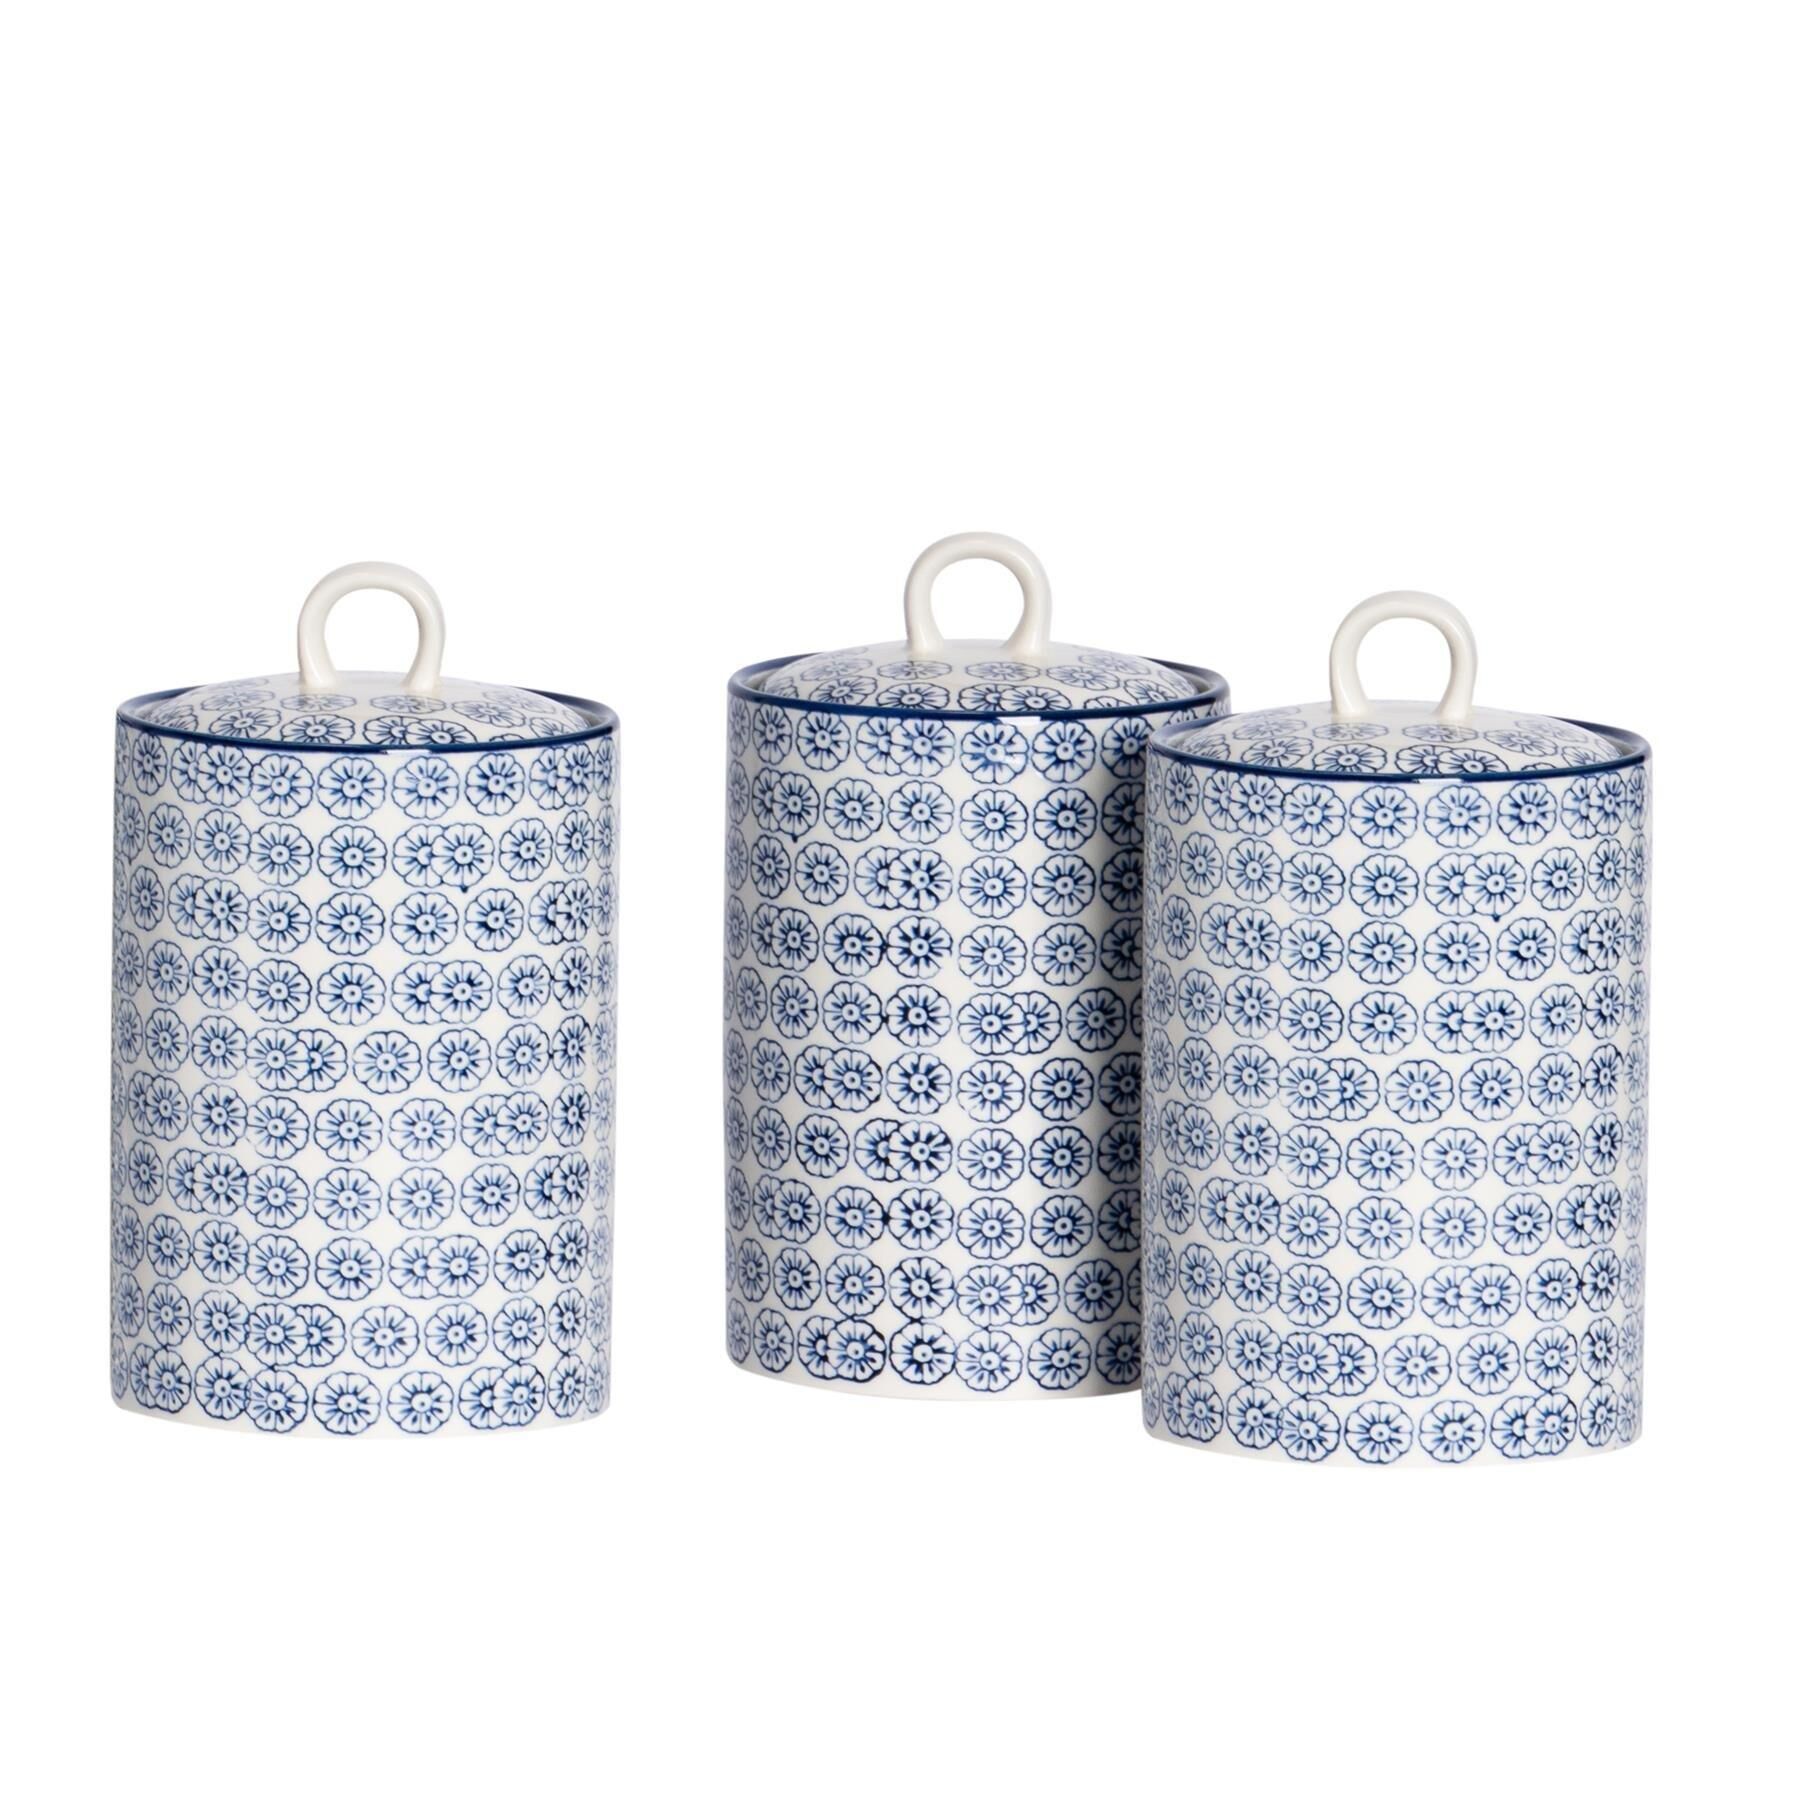 Nicola Spring Hand-Printed Kitchen Canisters 1 Litre Pack of 3